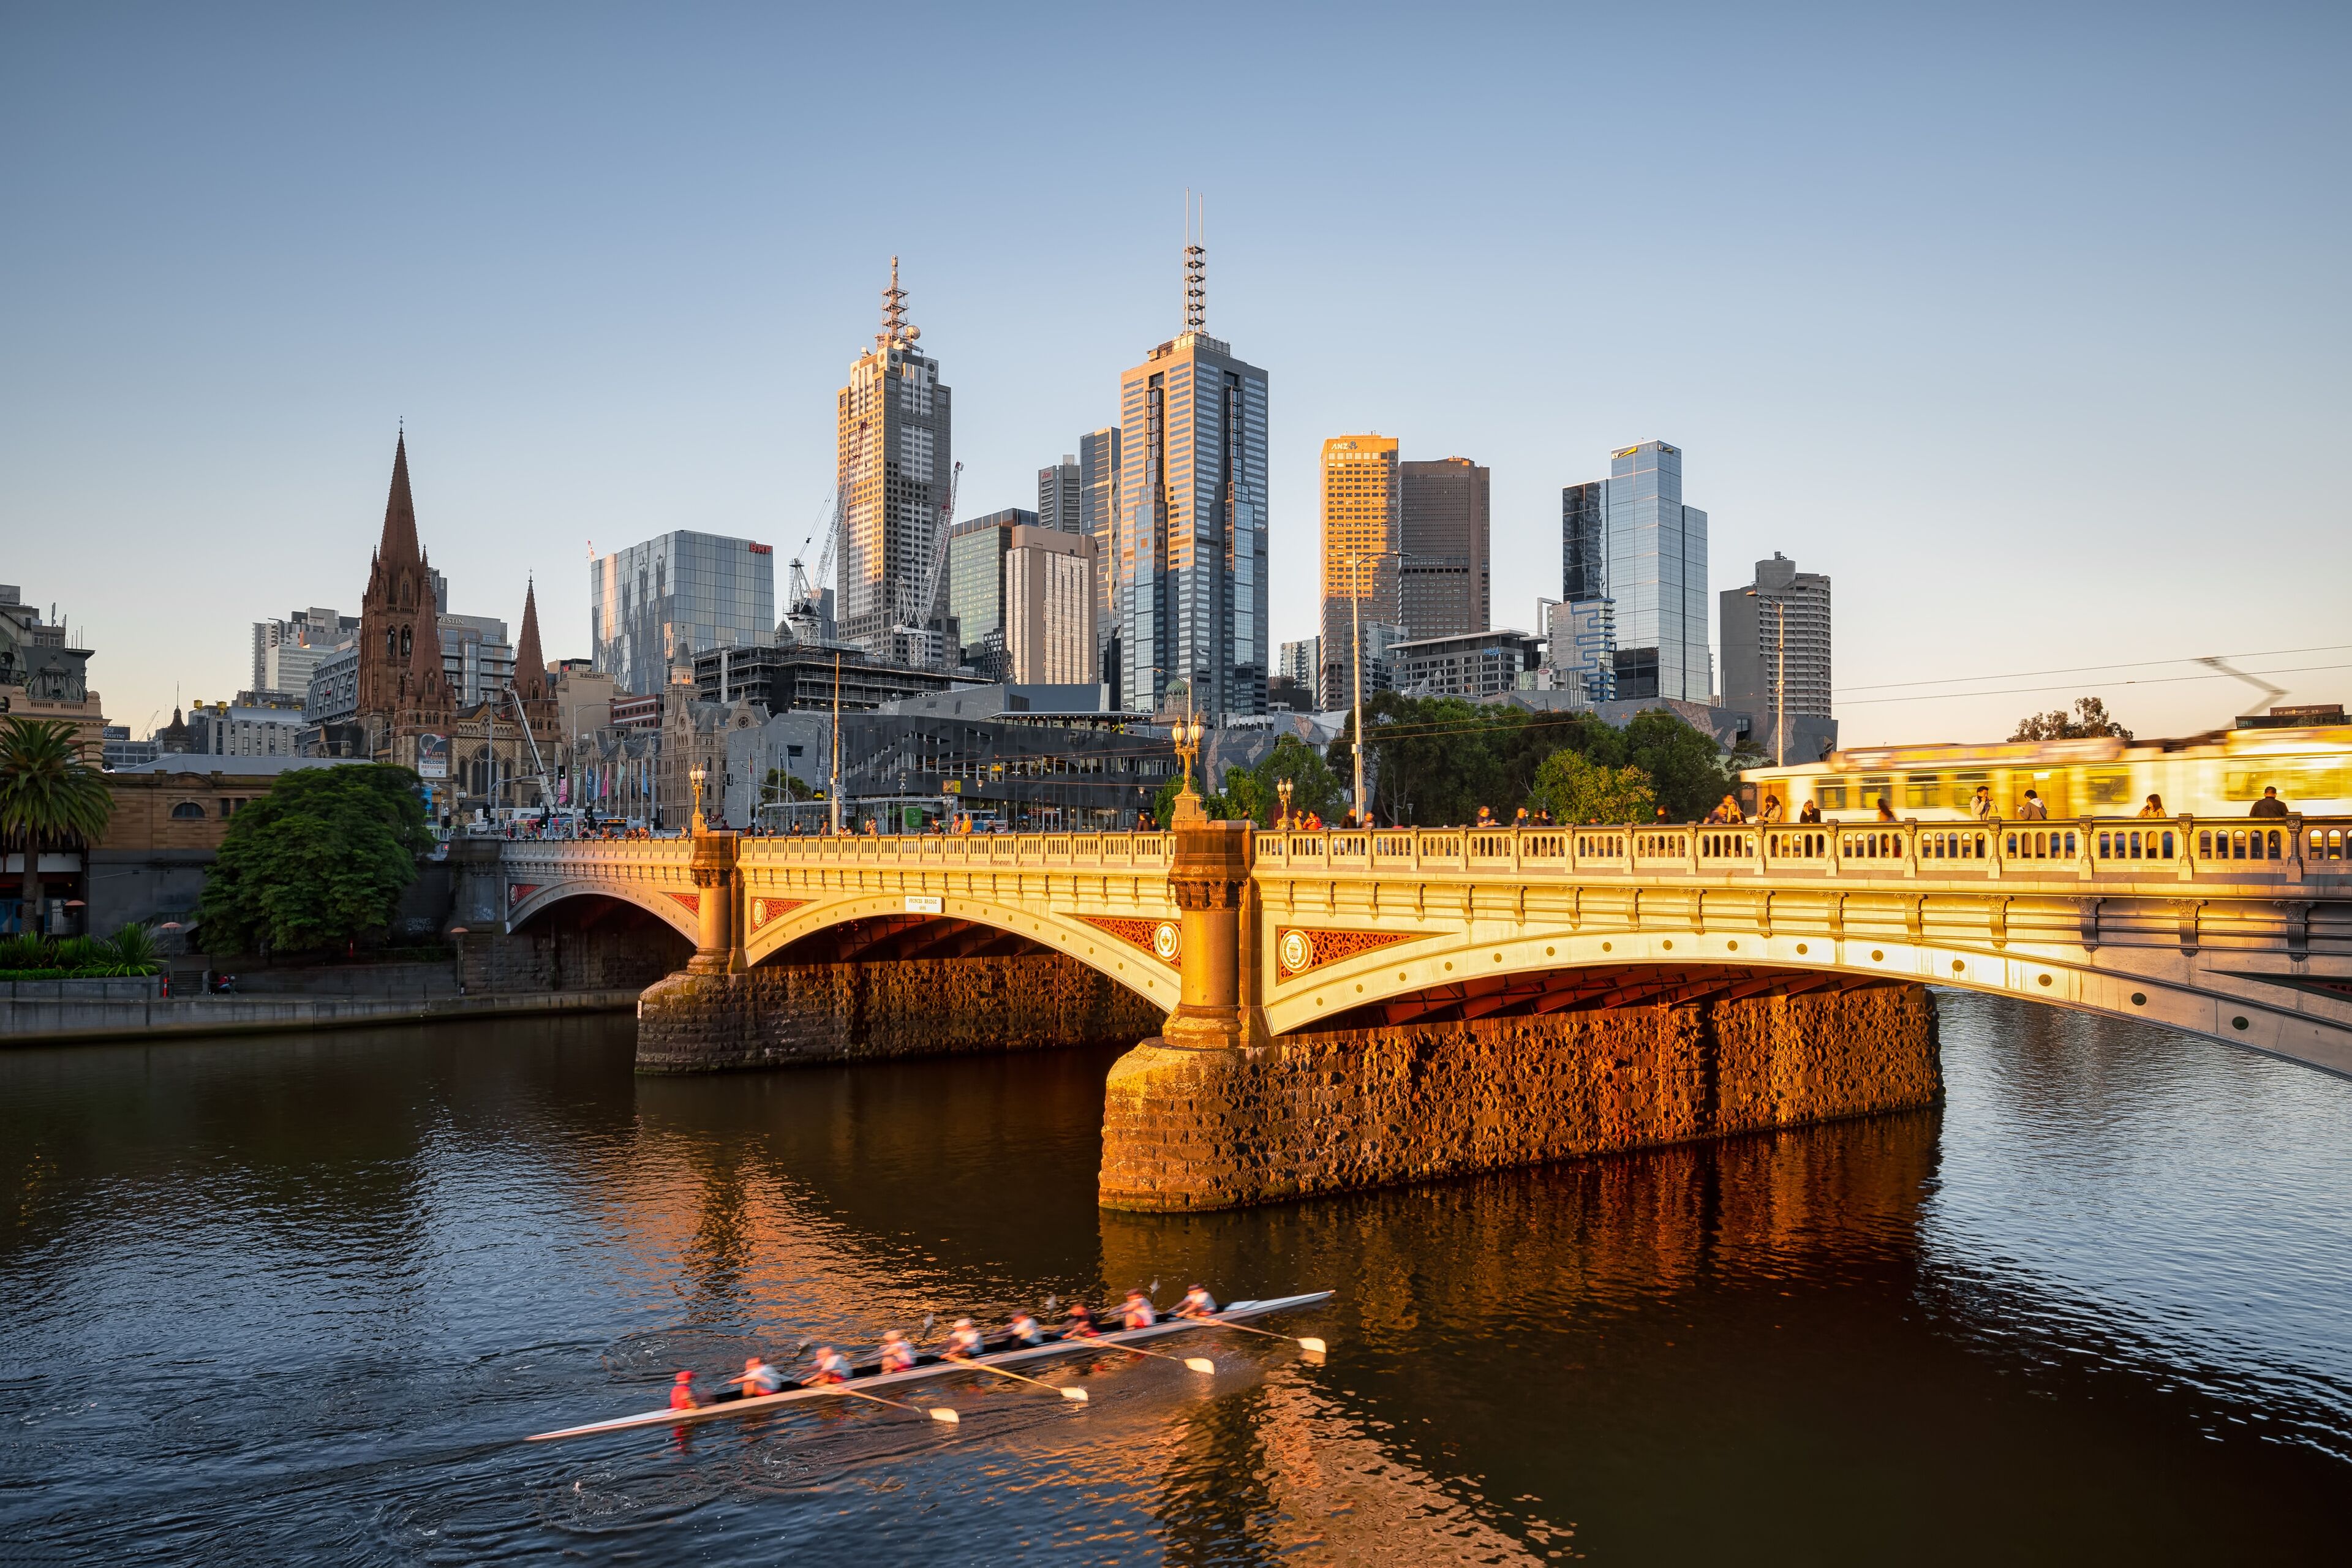 unset shot of the famous Yarra River in Melbourne, Australia, showing the city center in the middle. 